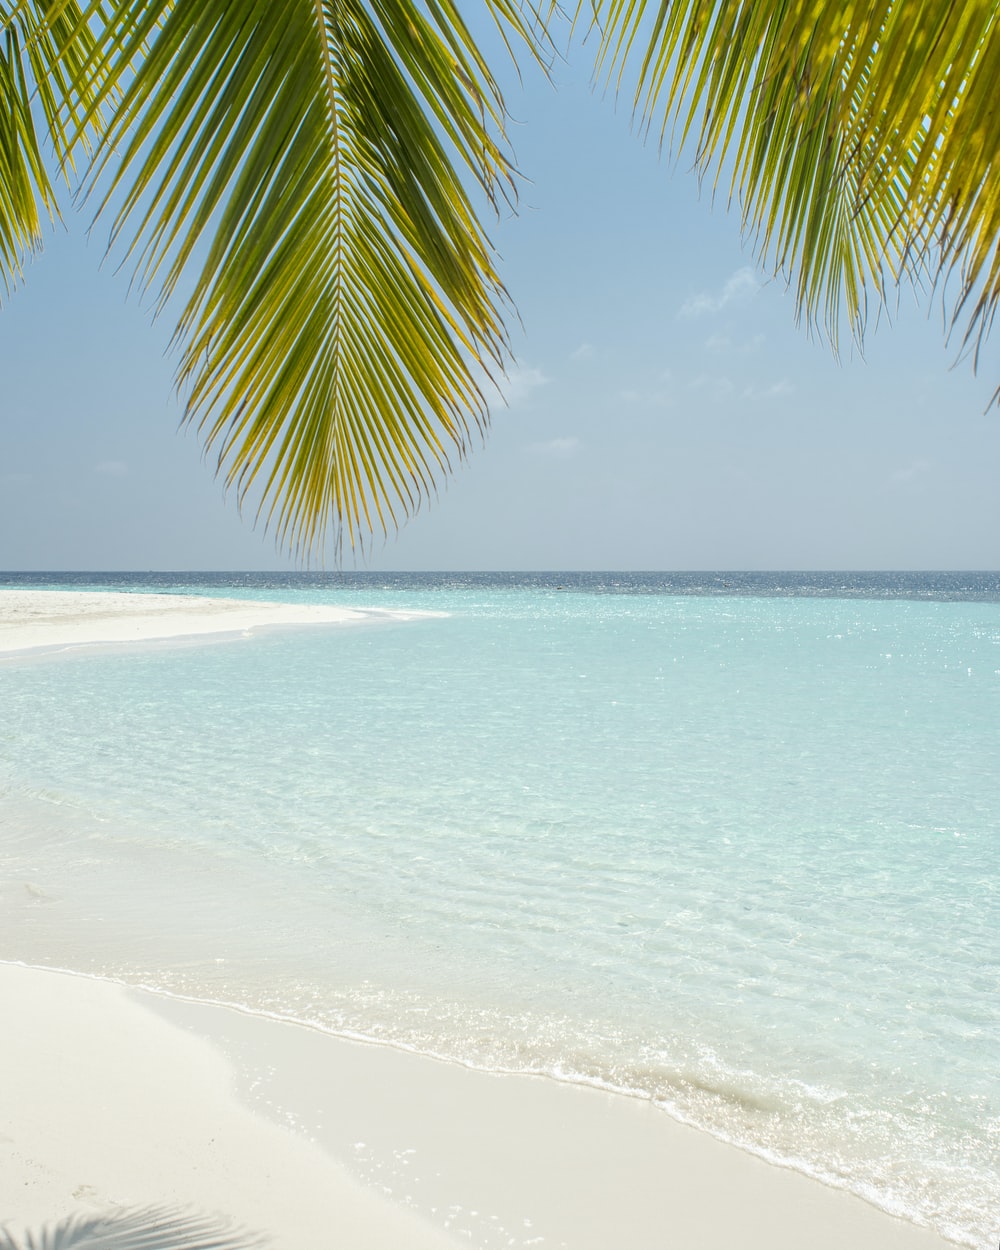 Tropical Beach Picture. Download Free Image